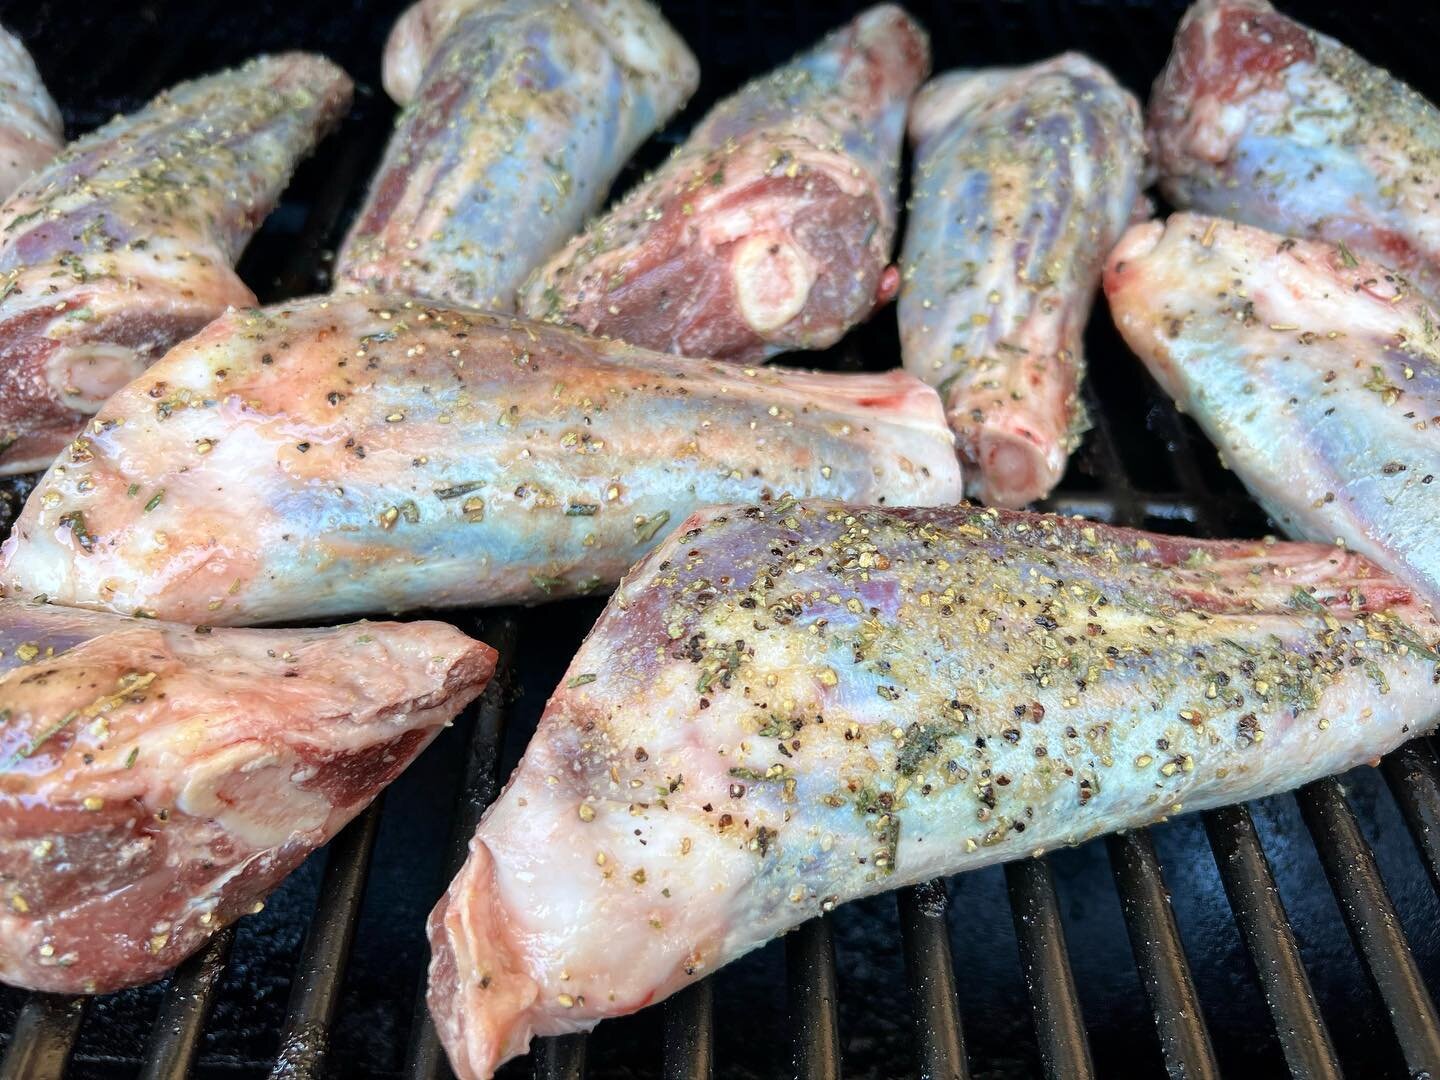 Lamb shanks in the smoker cooking away for tonight&rsquo;s dinner.
Available till sold out 
Book by calling 65556060 or hit the messenger button below #bbqlambshank #bbqlamb #yum #bbq #eatlocal #barringtoncoast #forster #tuncurryforster #tuncurry